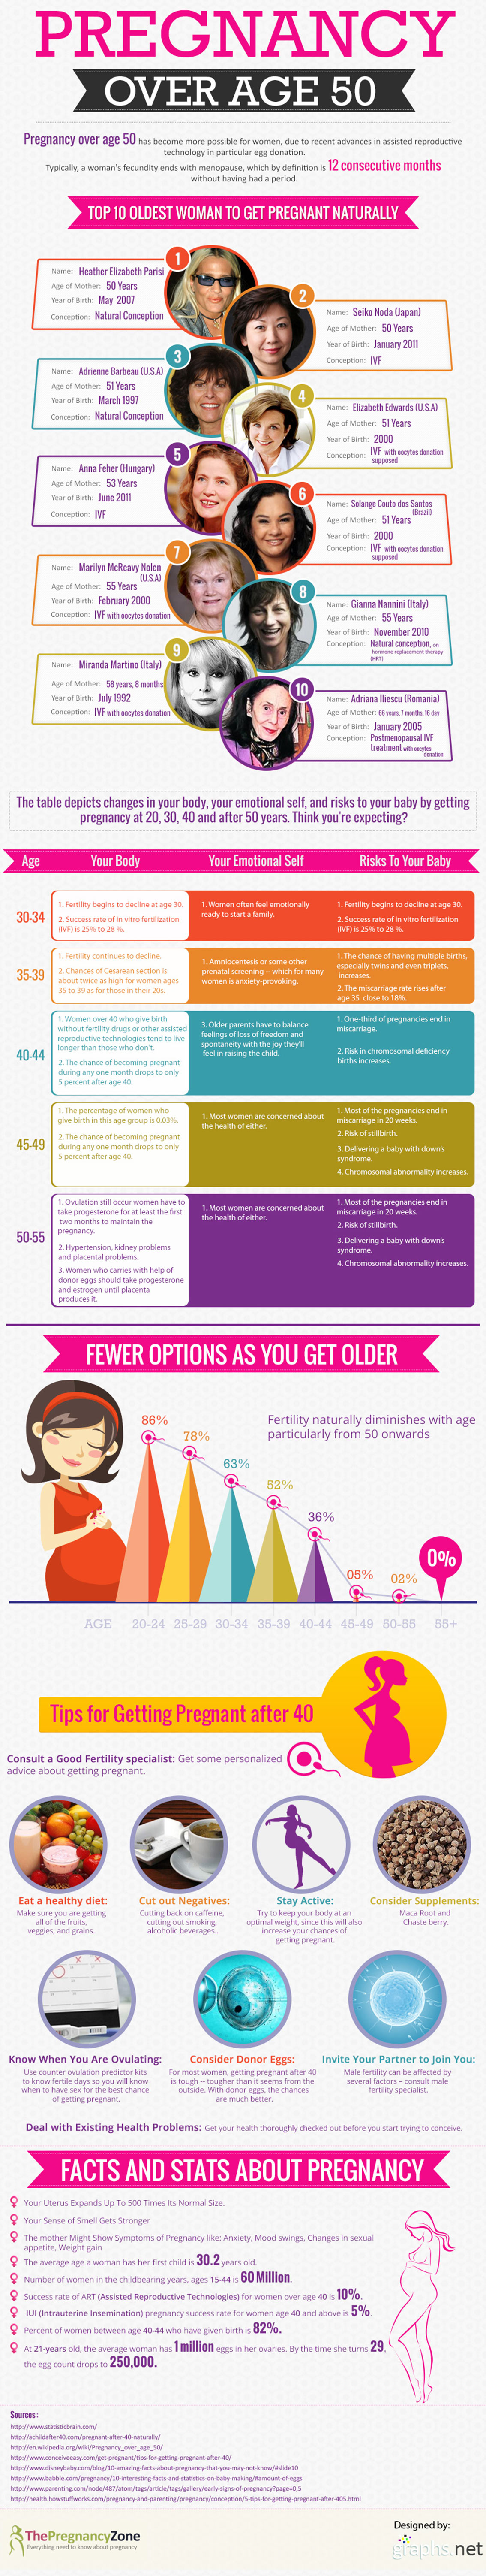 Pregnancy after 50 Years Old - Health Infographic